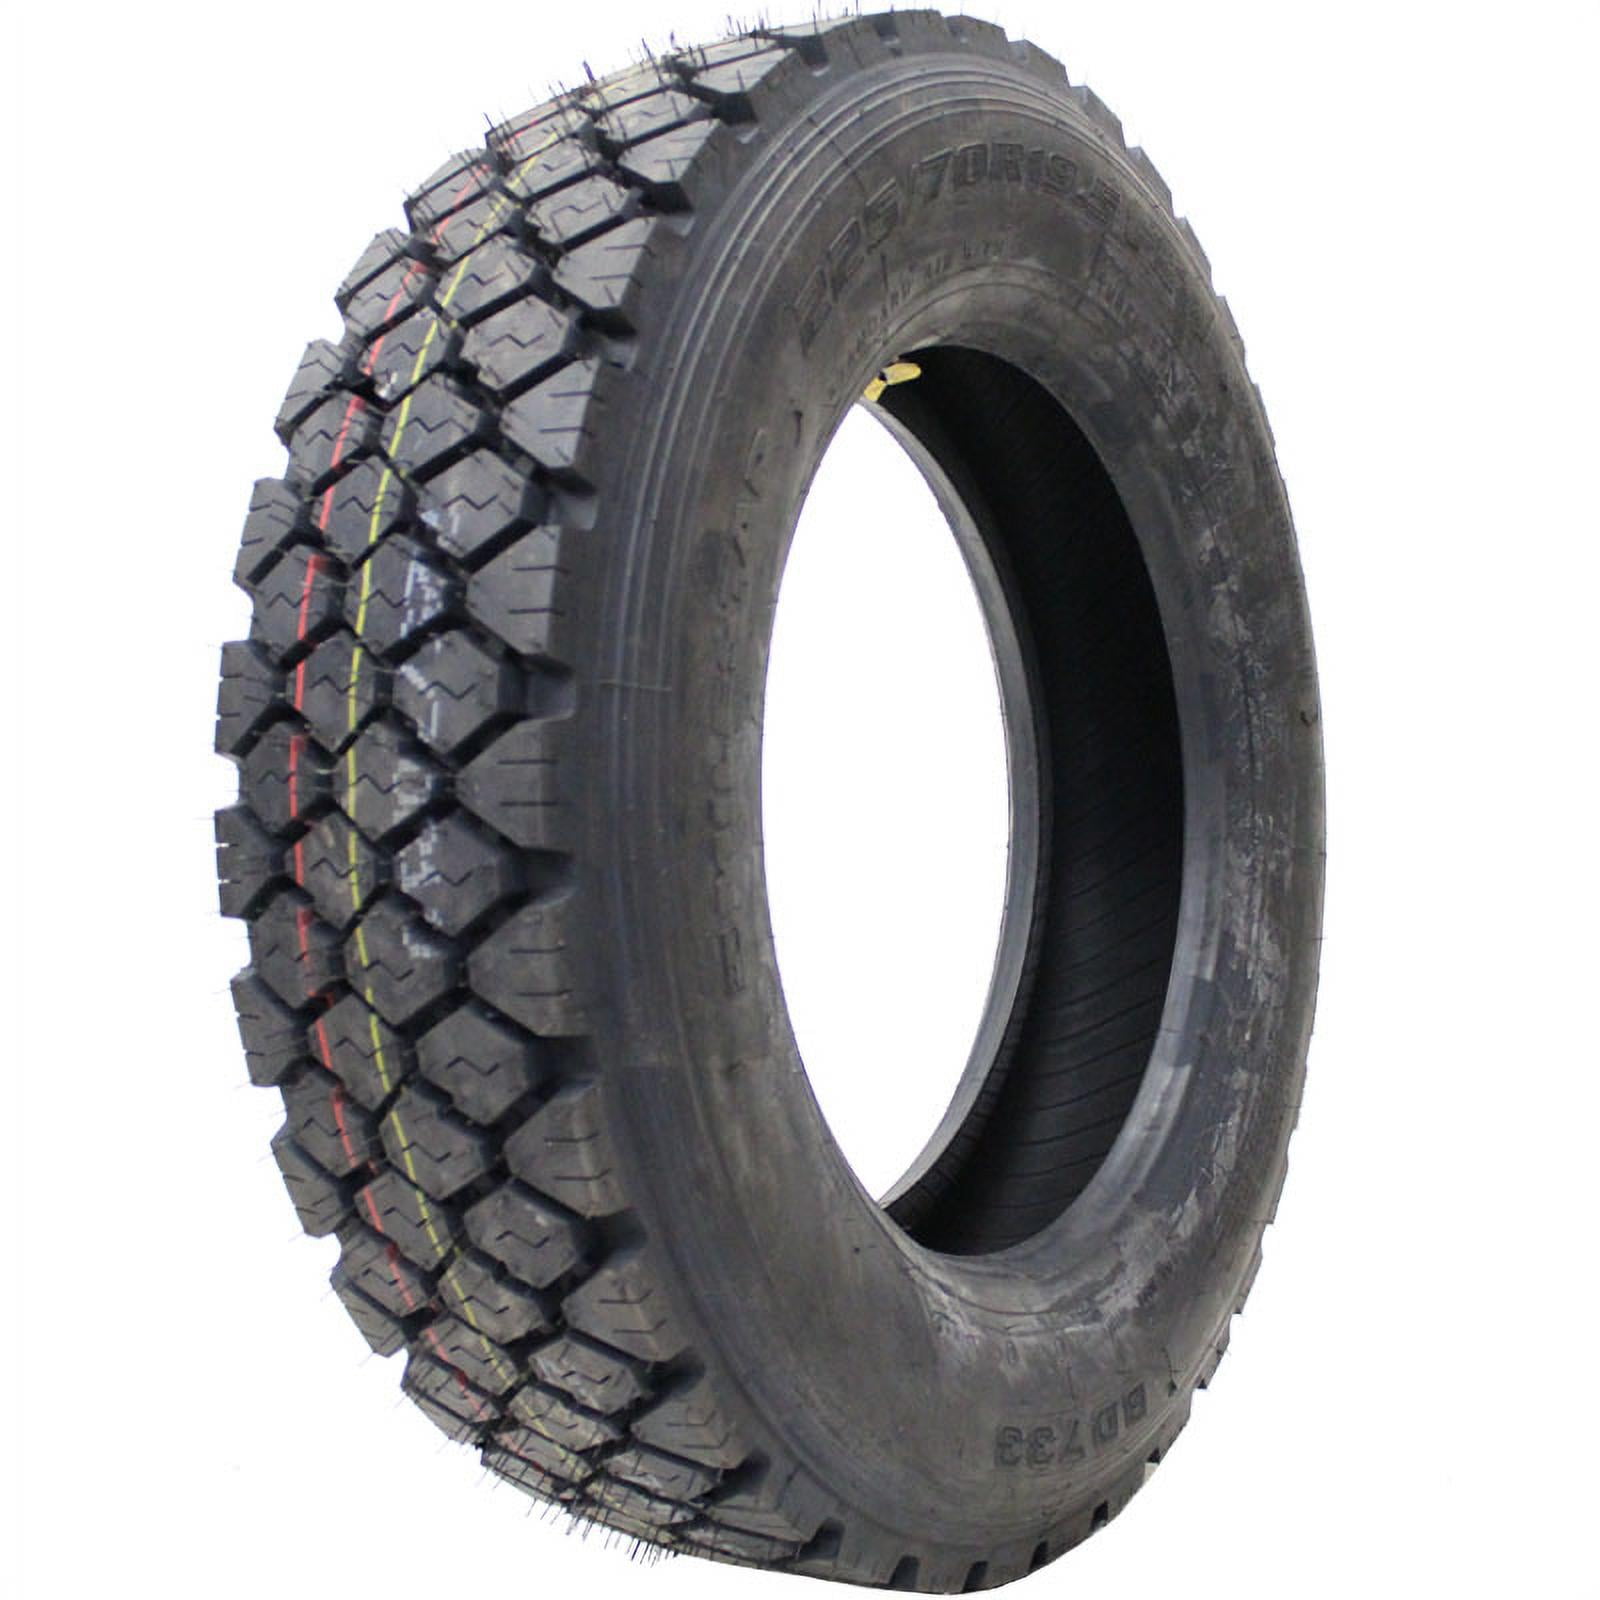 SUMITOMO ST718 Commercial Truck Tire 225/70-19.5 